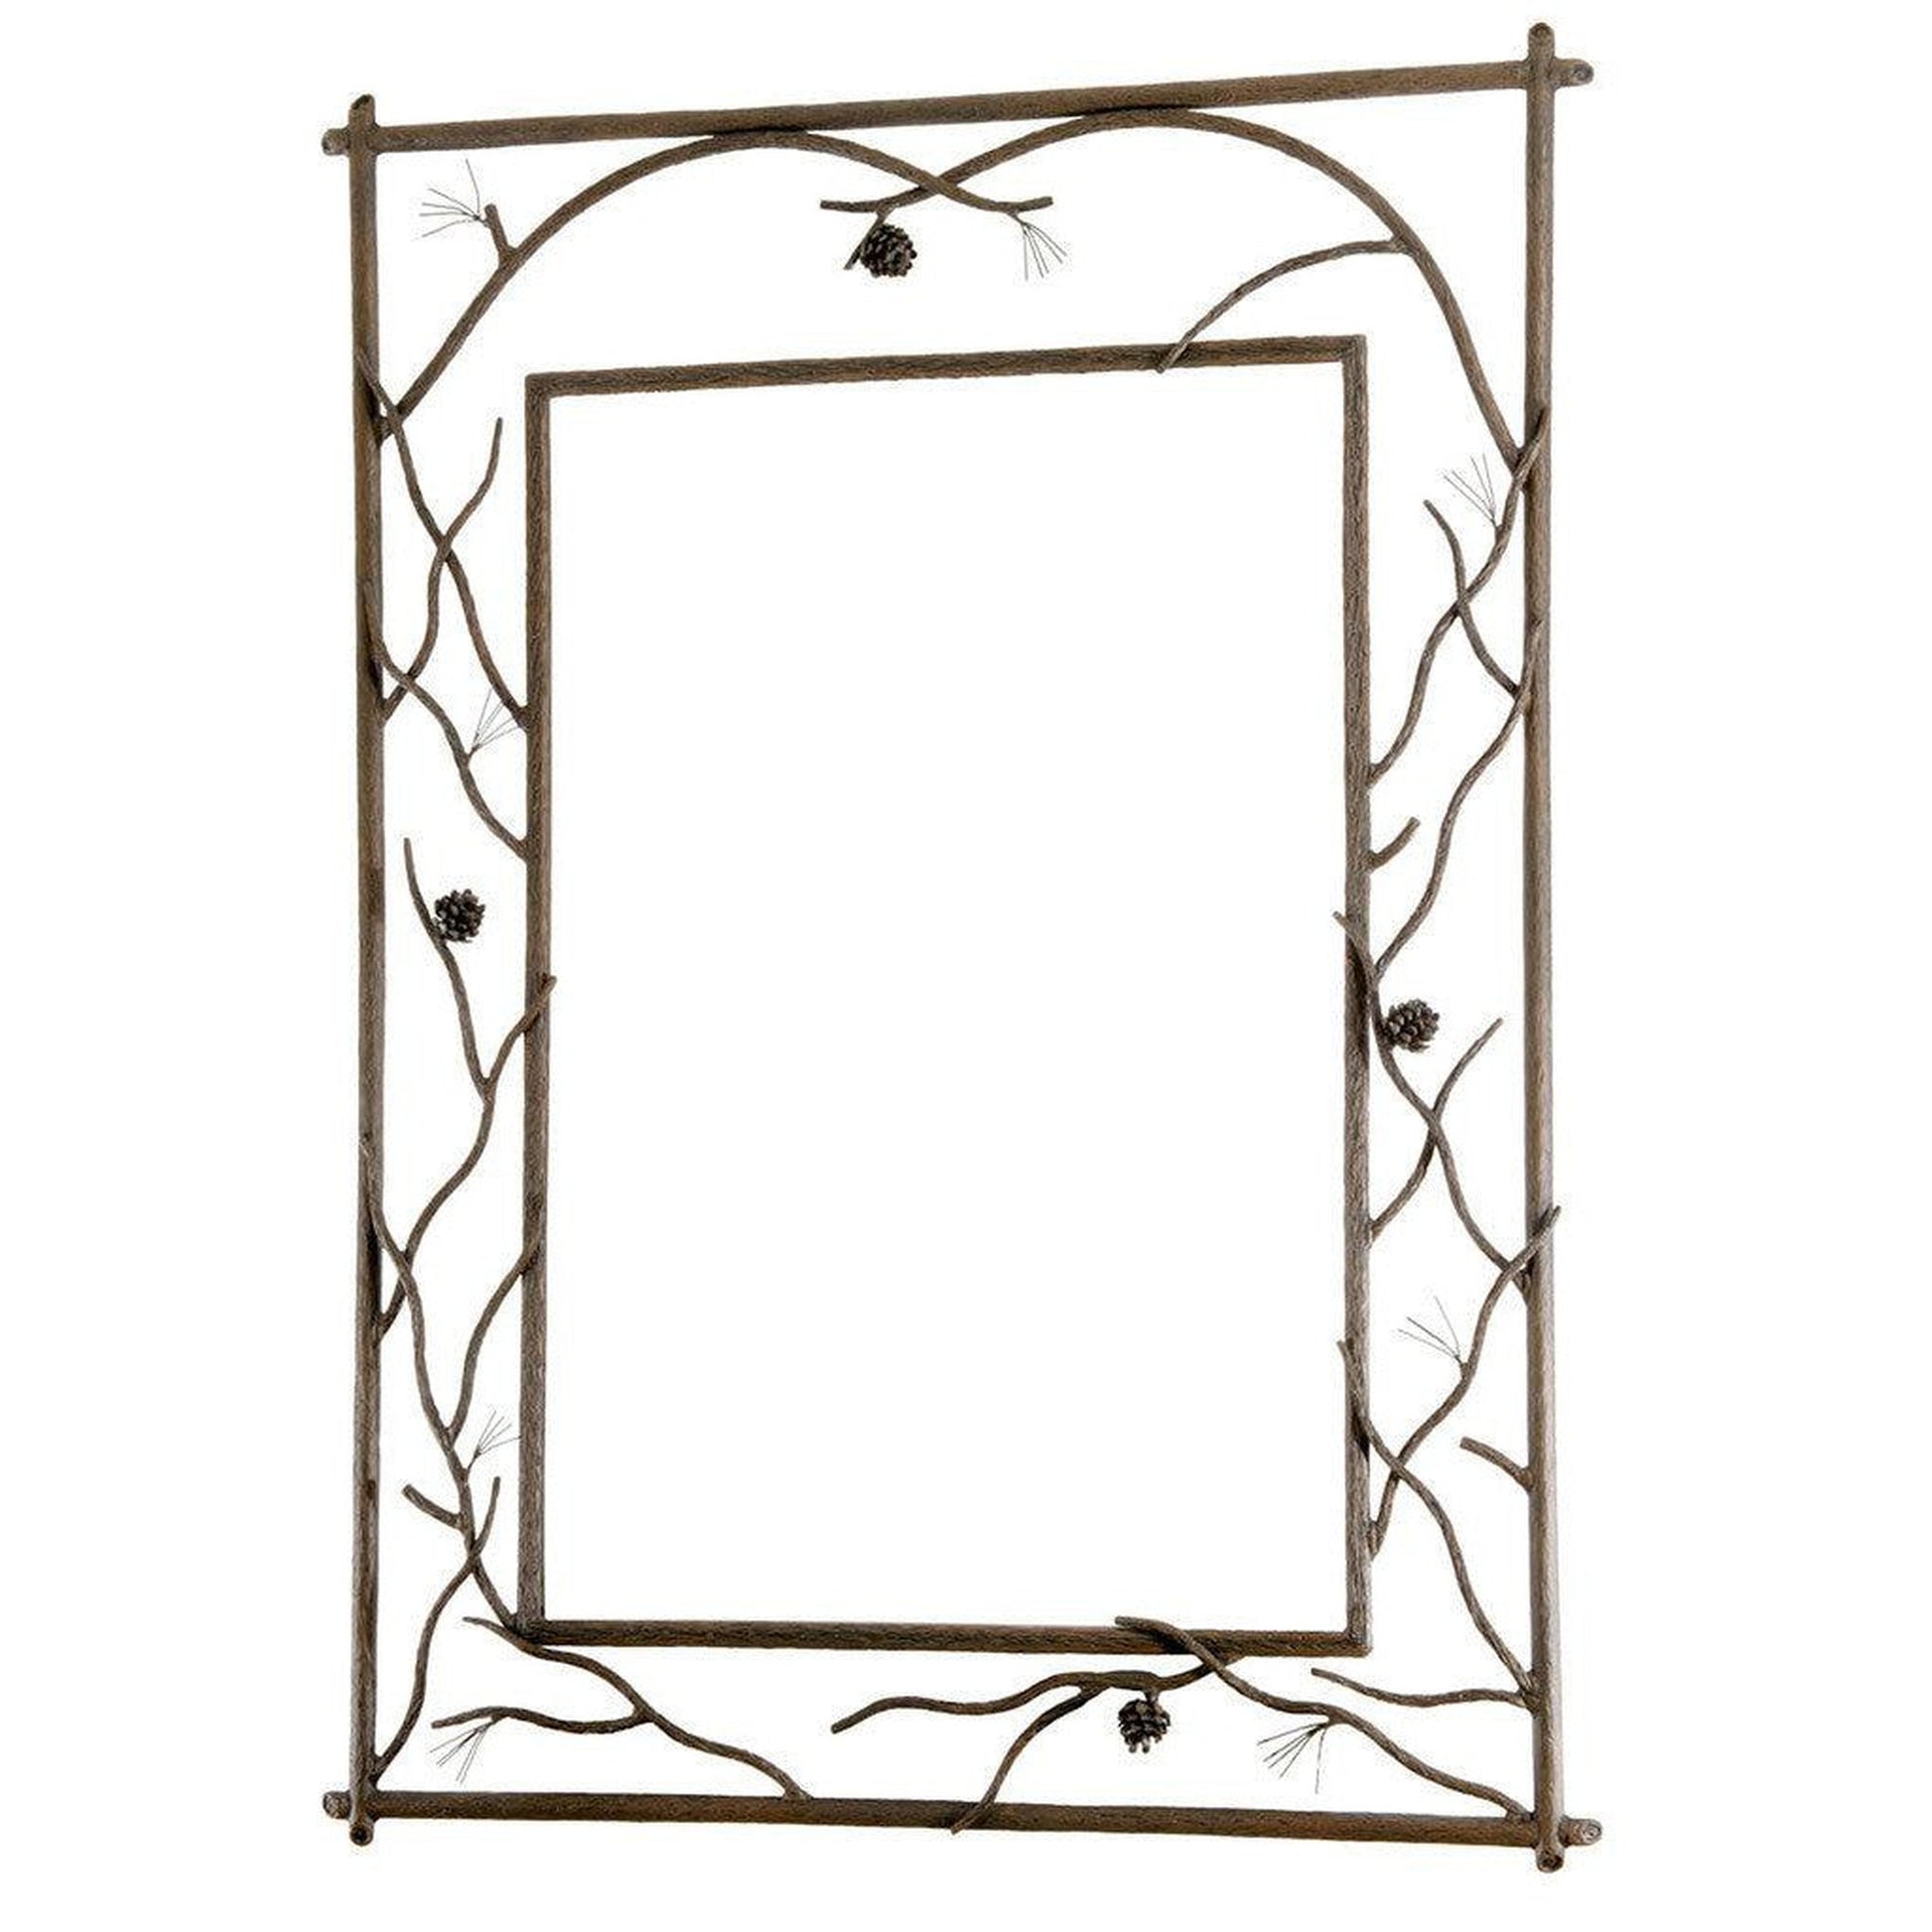 Stone County Ironworks Pine 37" x 51" Large Satin Black Branched Iron Wall Mirror With Gold Iron Accent